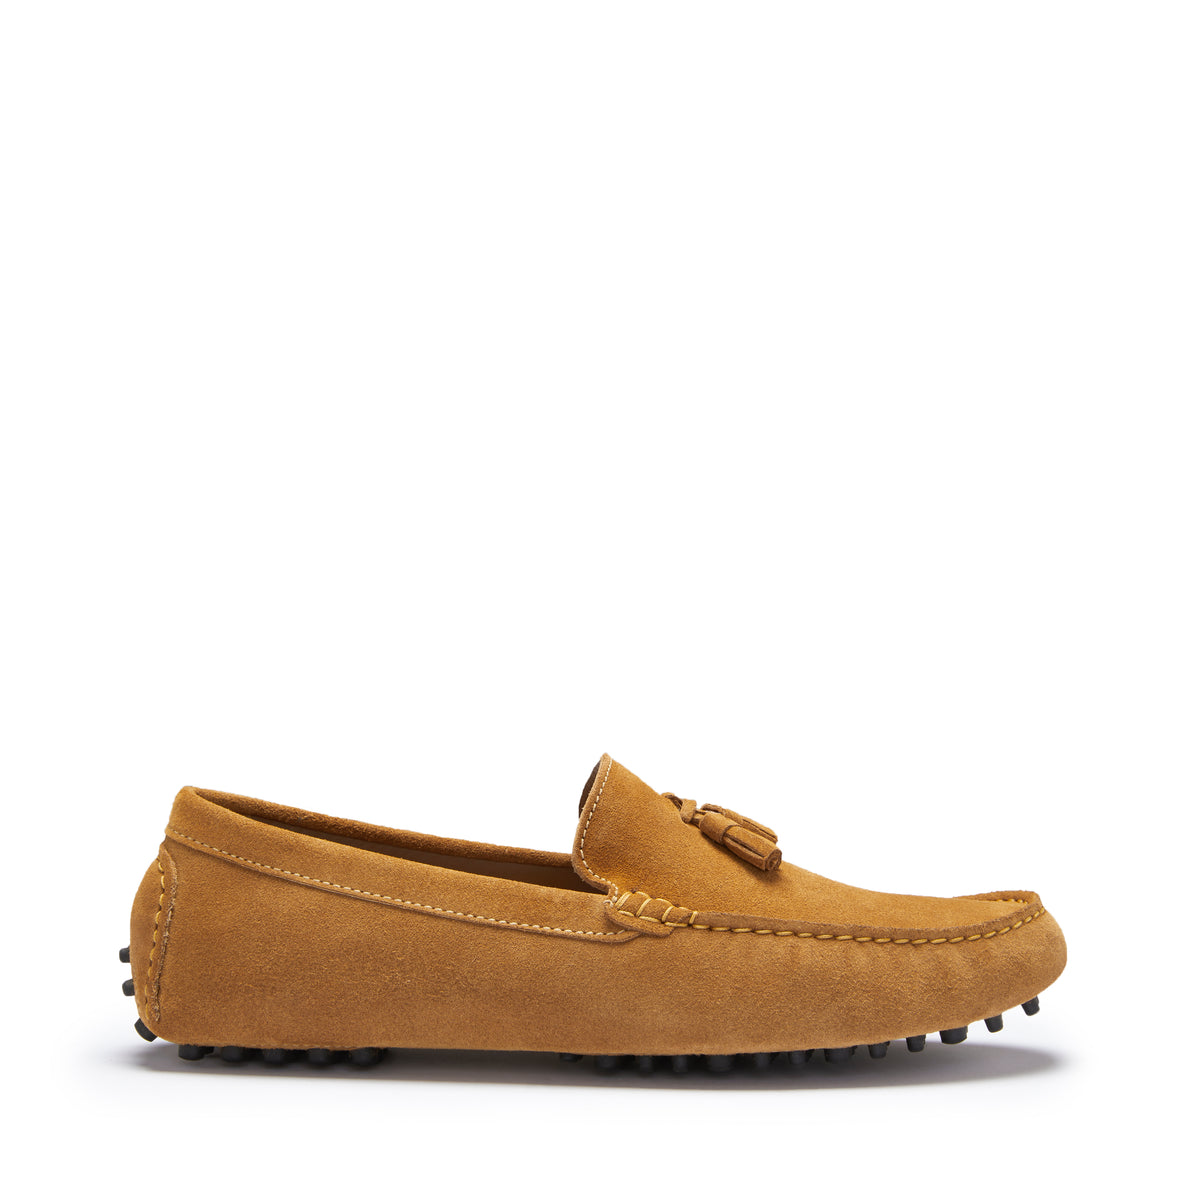 Tasselled Driving Loafers, tobacco suede